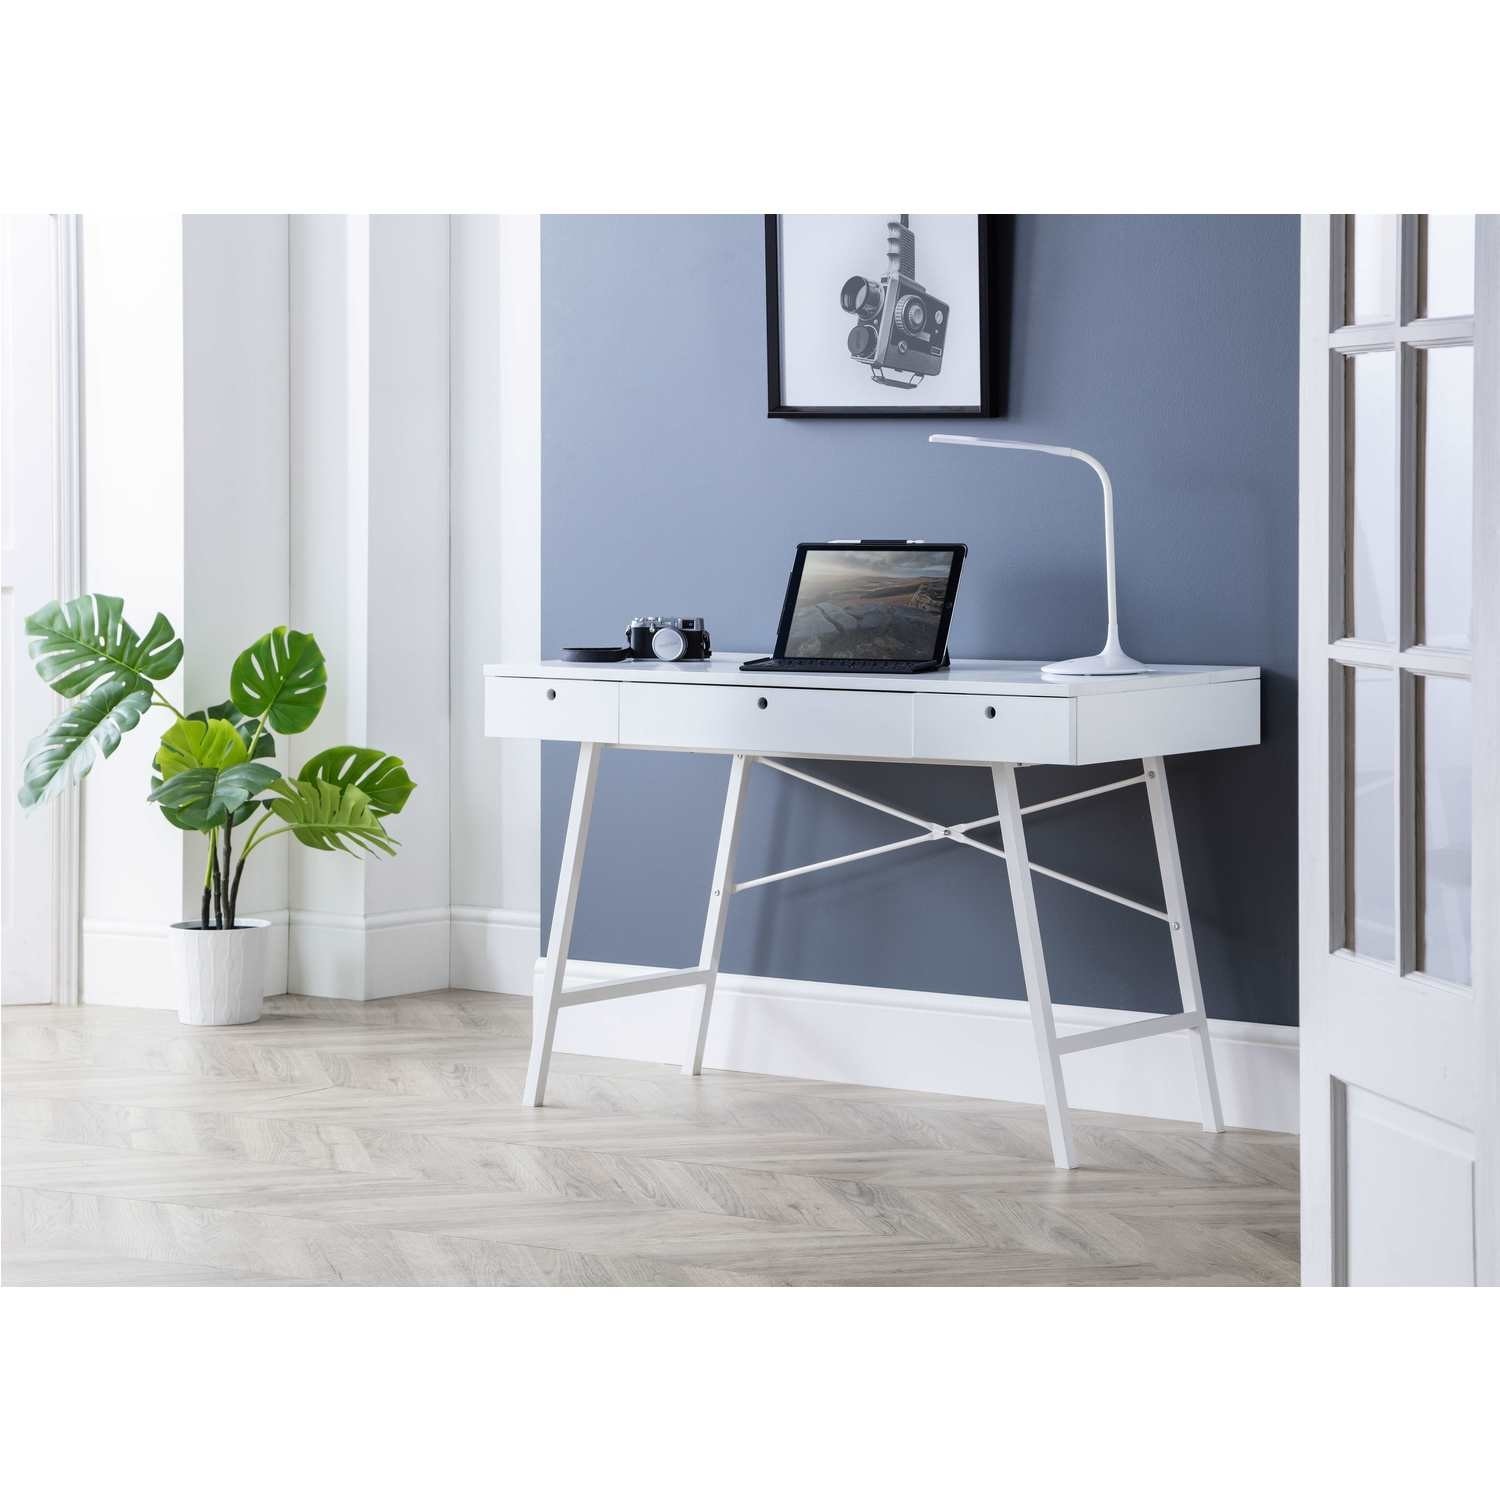 Photo of White wooden desk with drawers - julian bowen